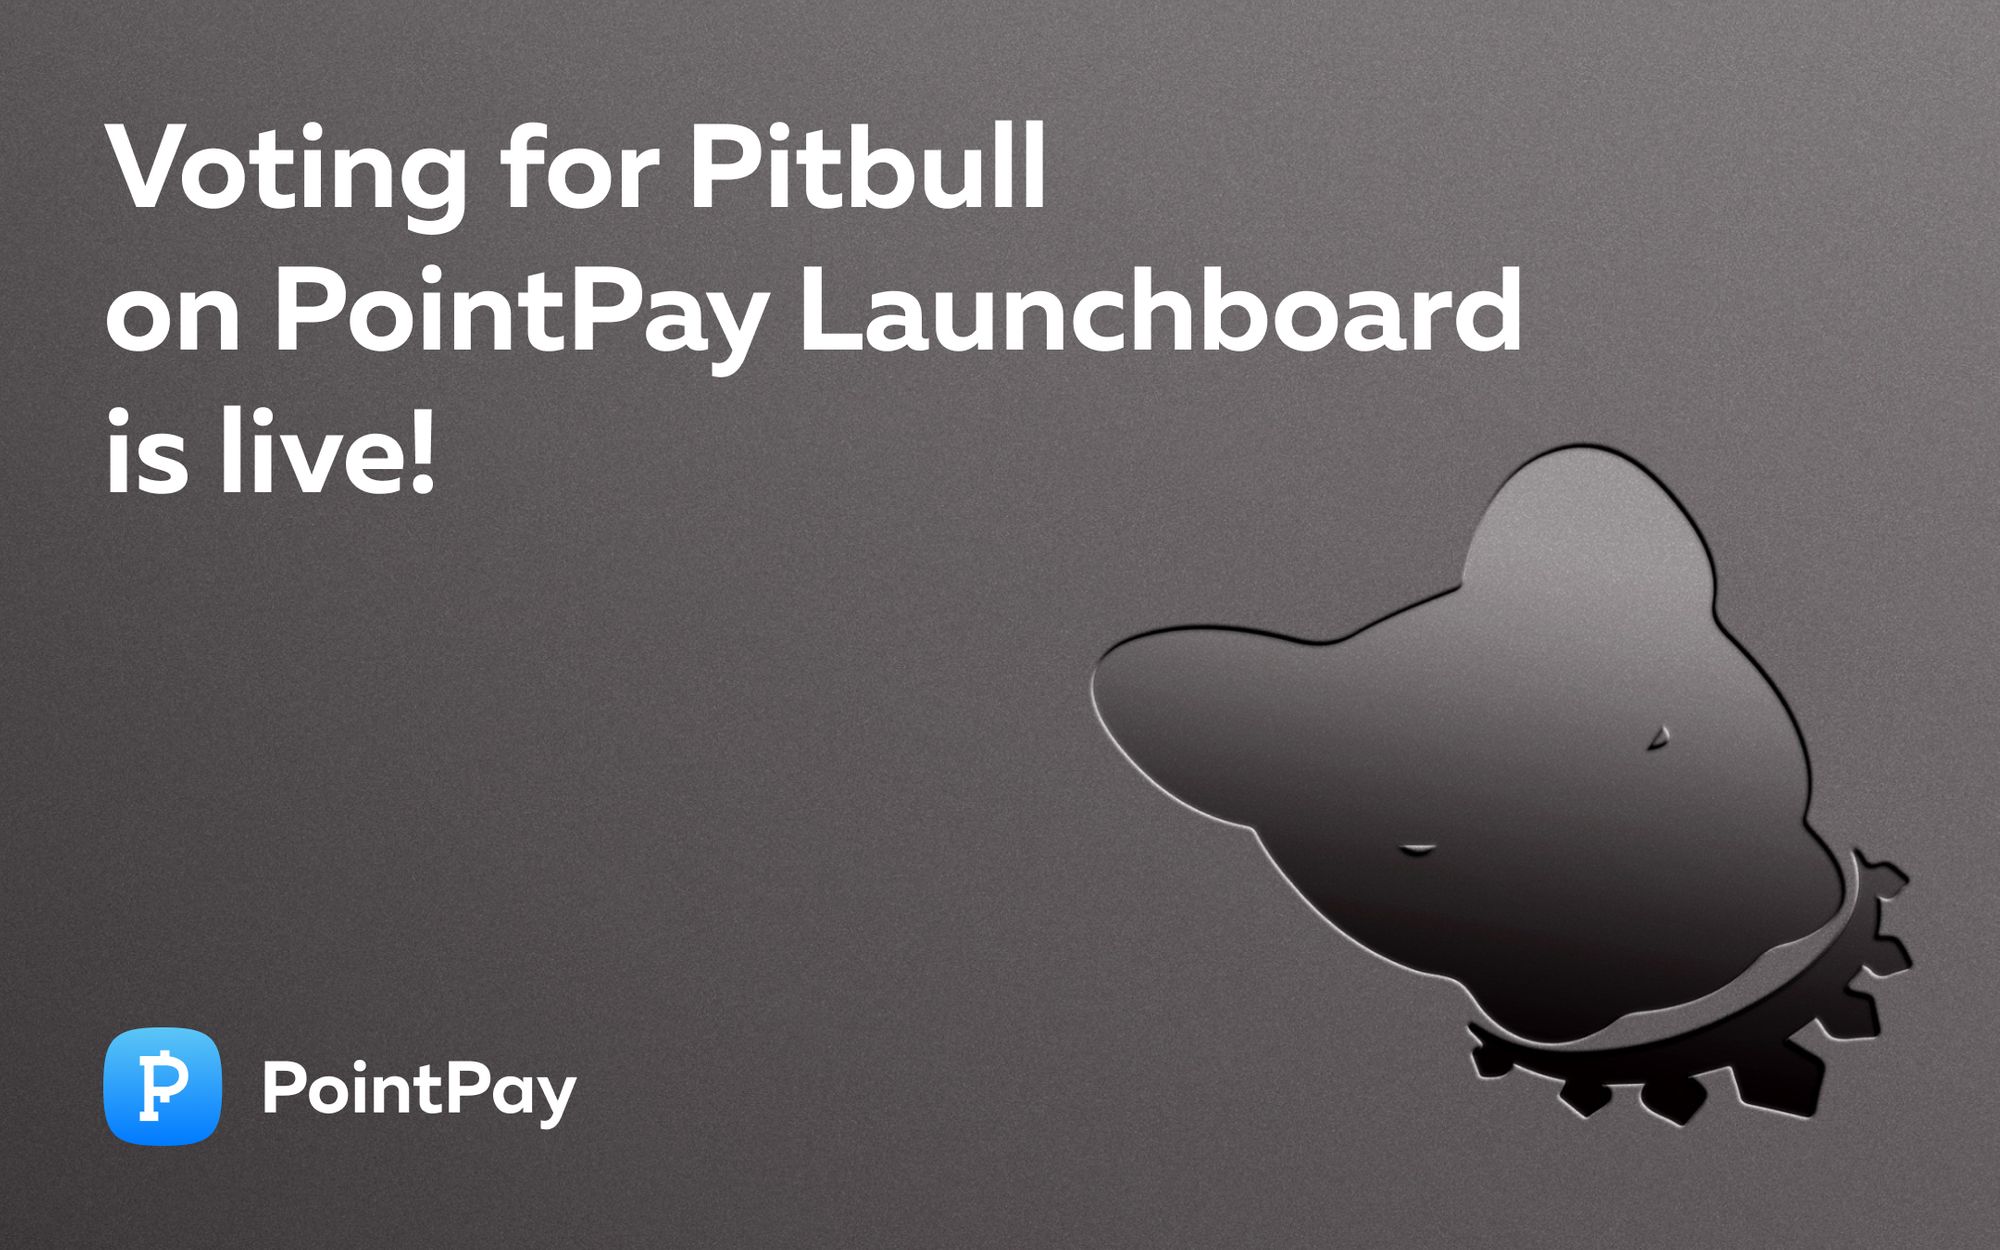 Vote for the Pitbull to be listed on PointPay!